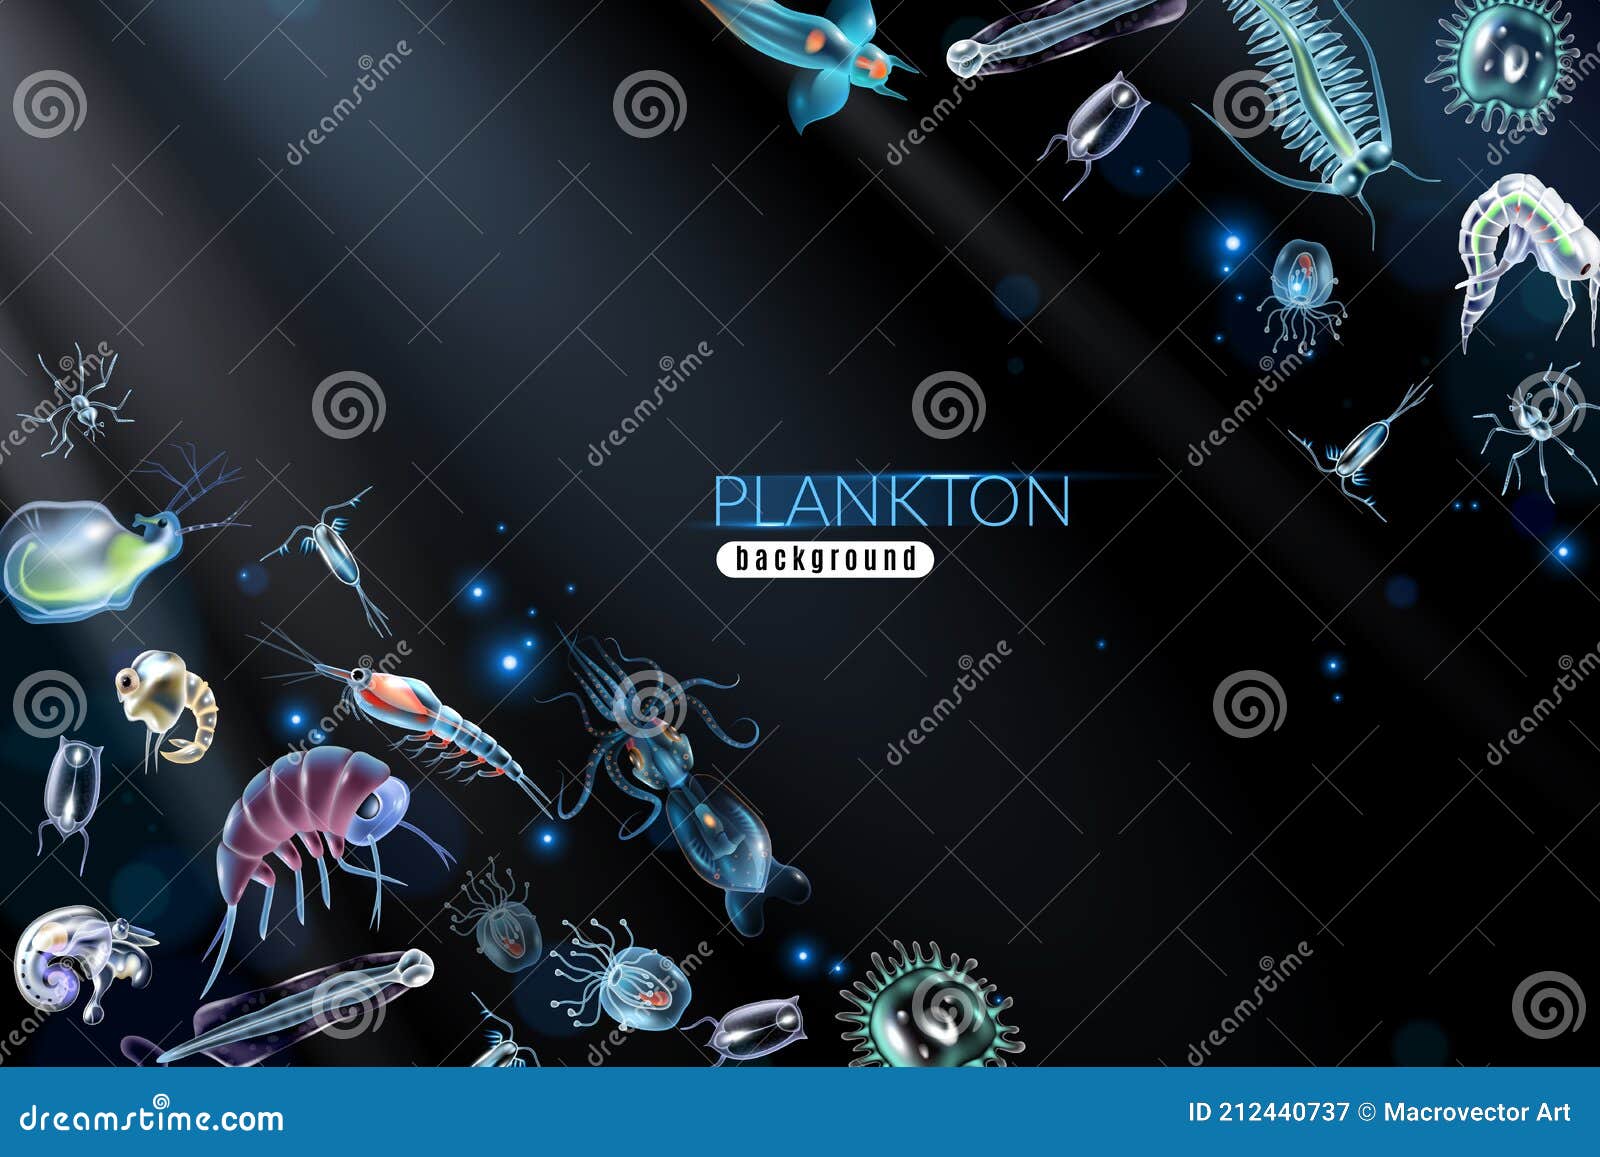 Pictures Of Plankton Background Images HD Pictures and Wallpaper For Free  Download  Pngtree